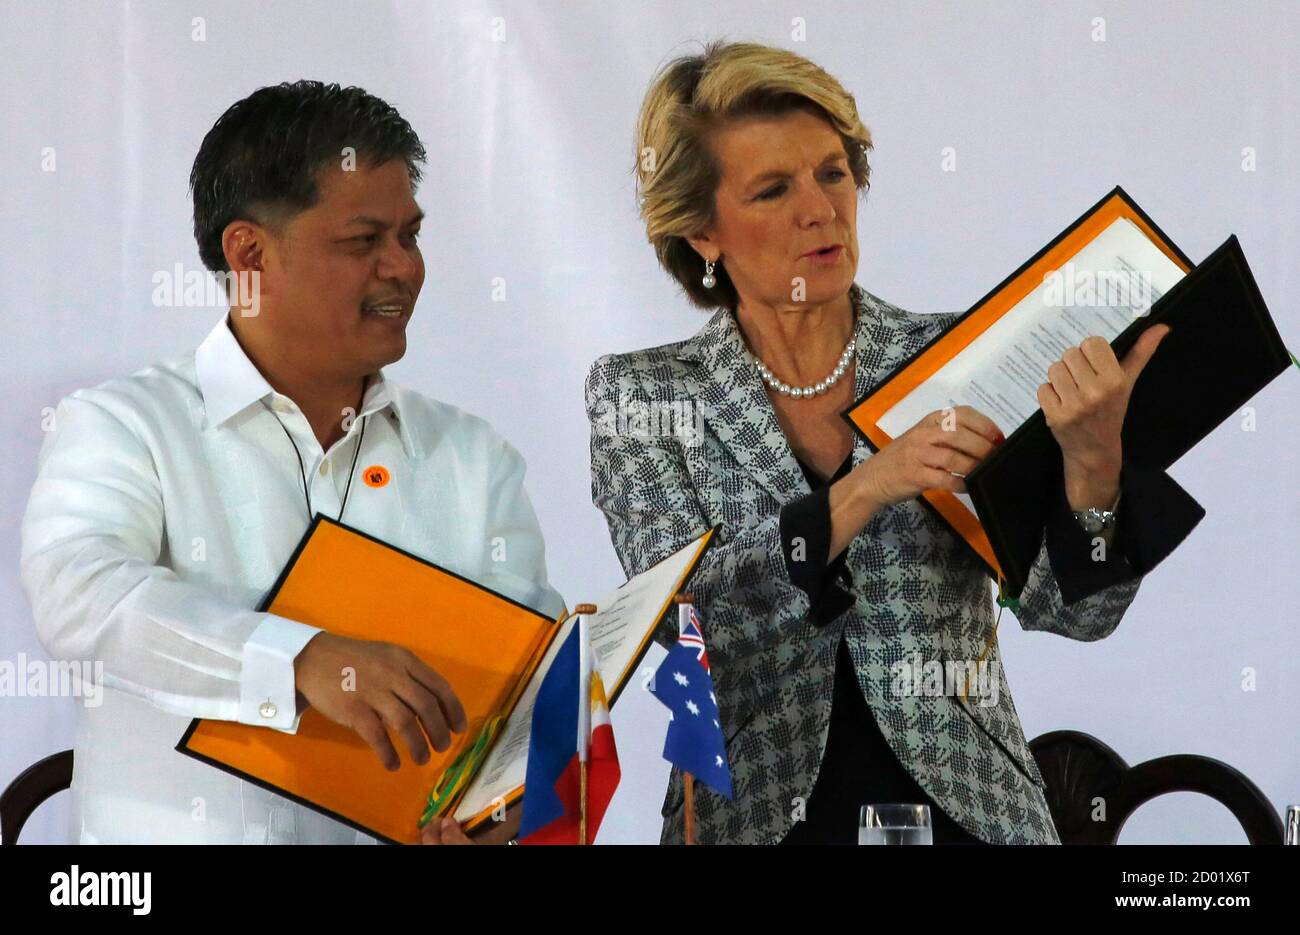 Australian Foreign Minister Julie Bishop (R) Education Secretary Armin Luistro documents after signing them during her visit to a school in Mandaluyong city, metro Manila February 21, 2014.